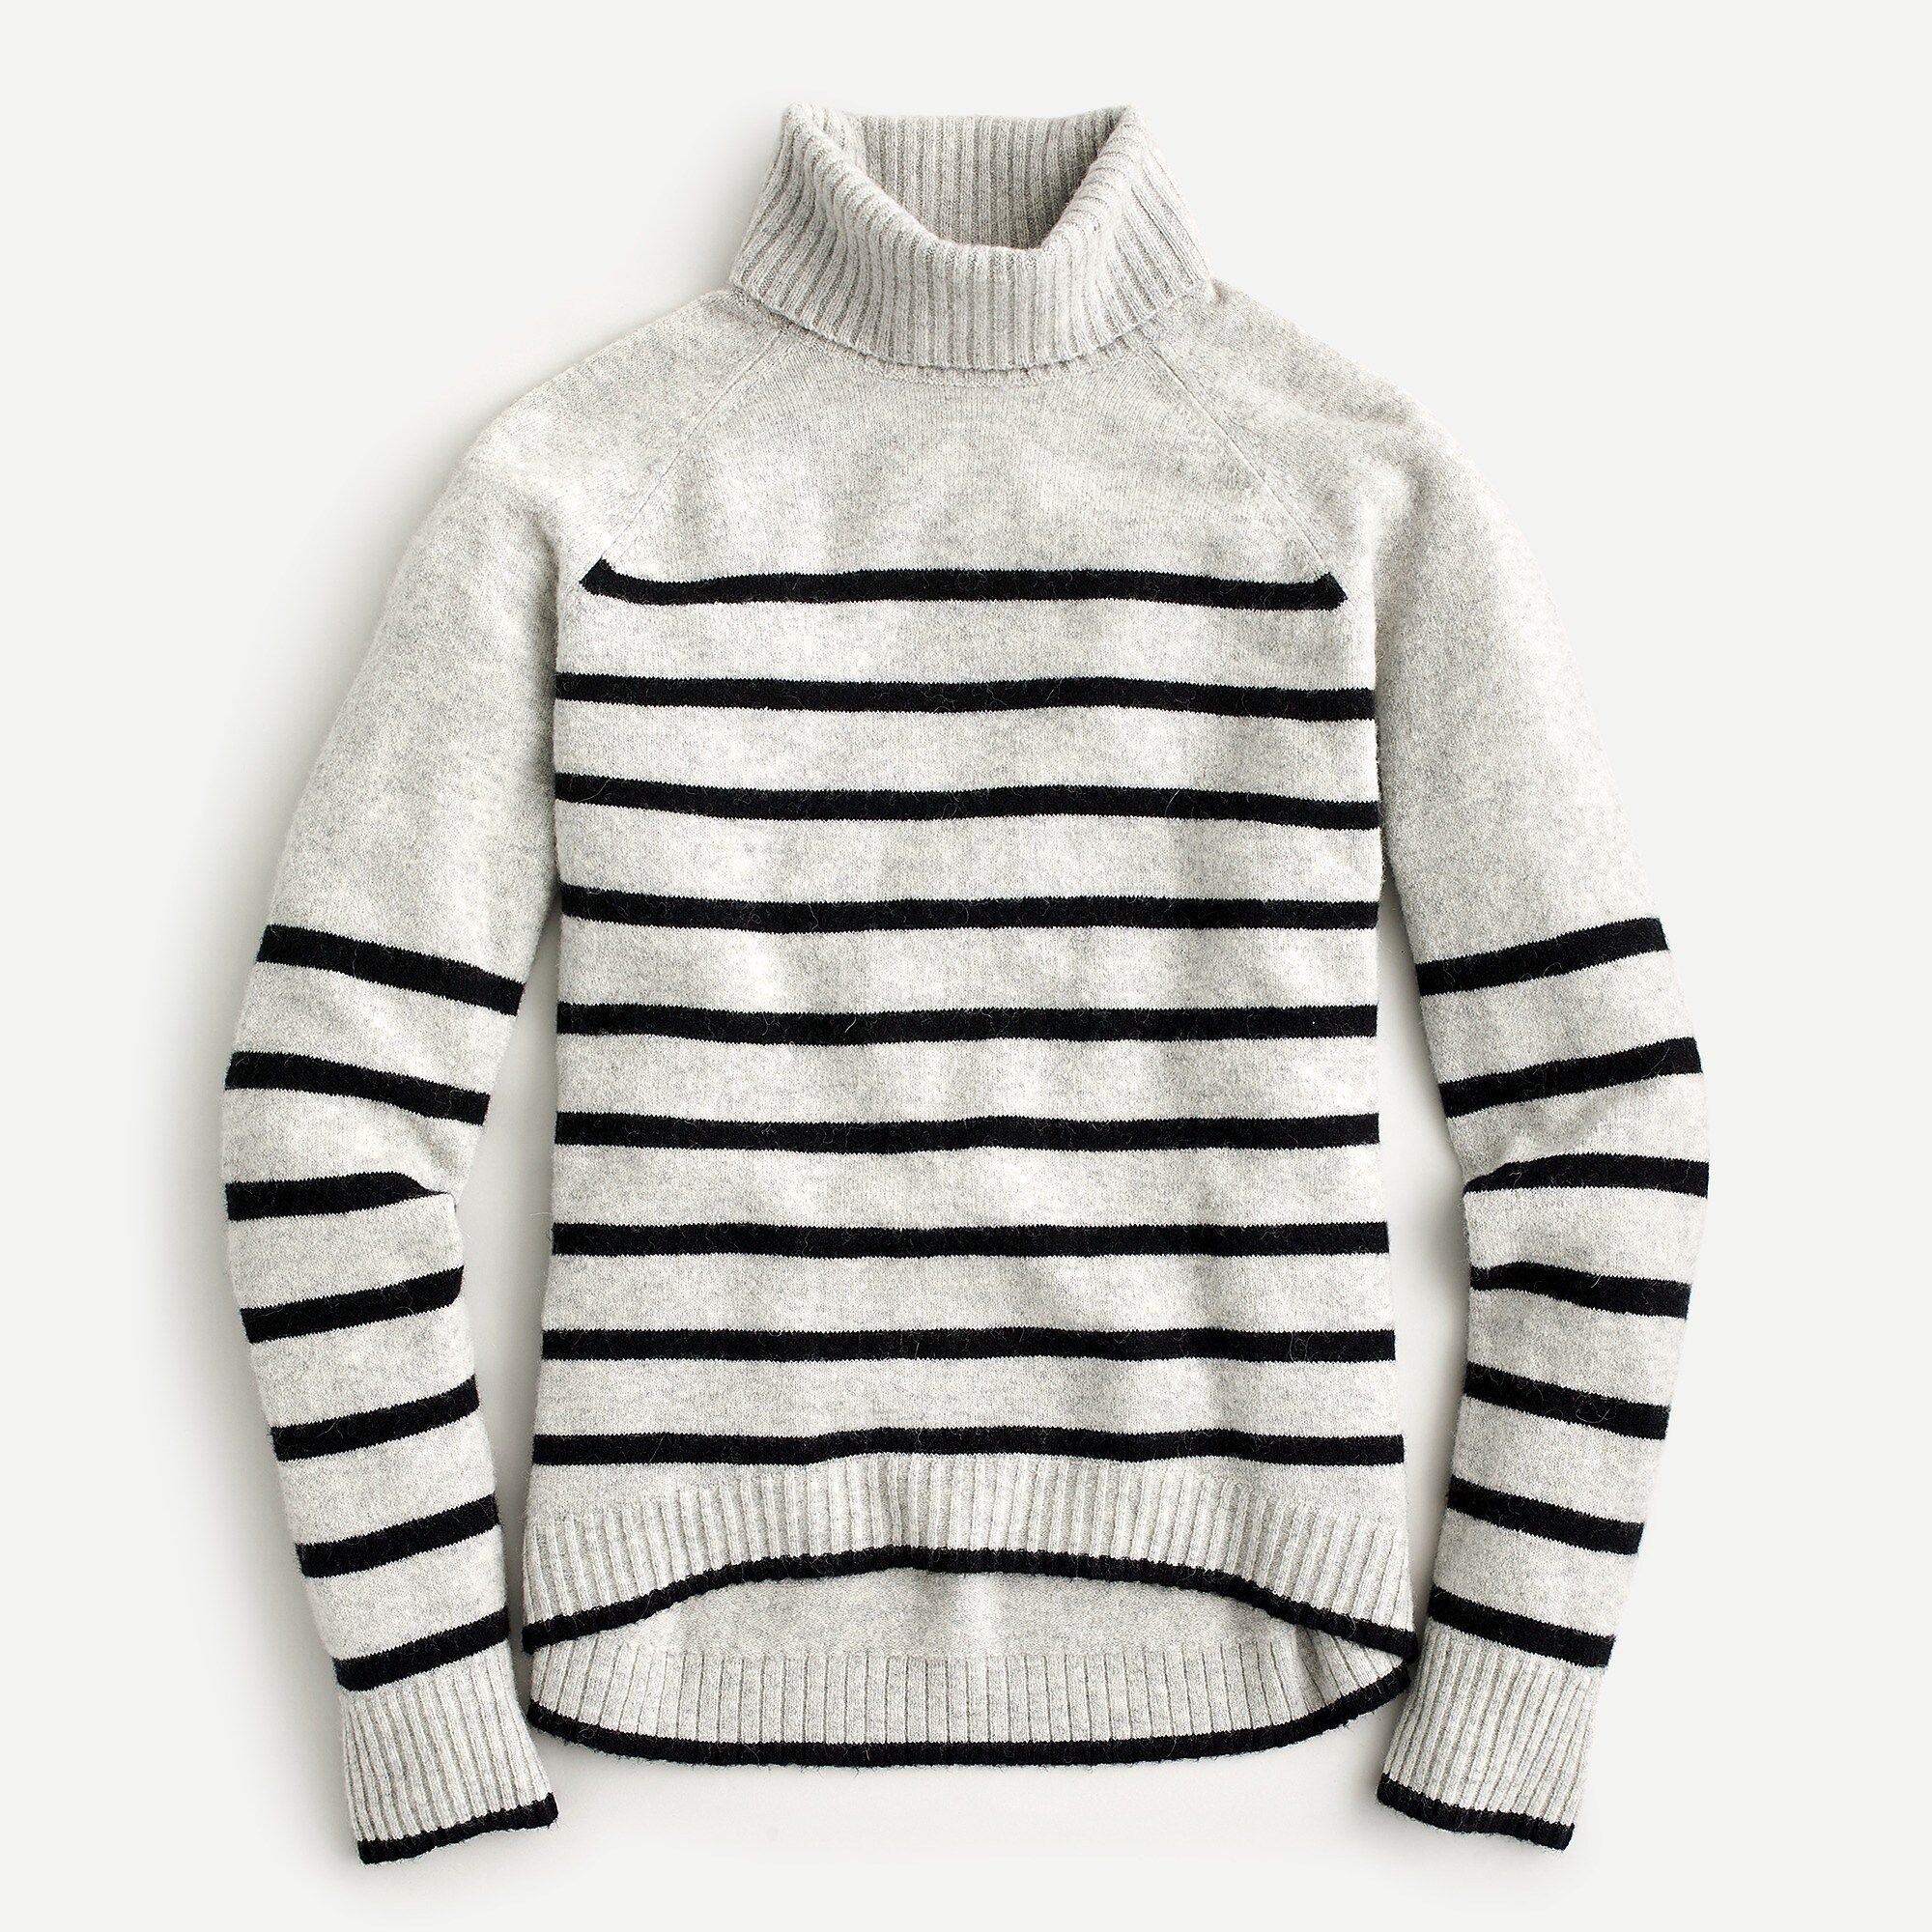 Tipped turtleneck sweater in striped supersoft yarn | J.Crew US